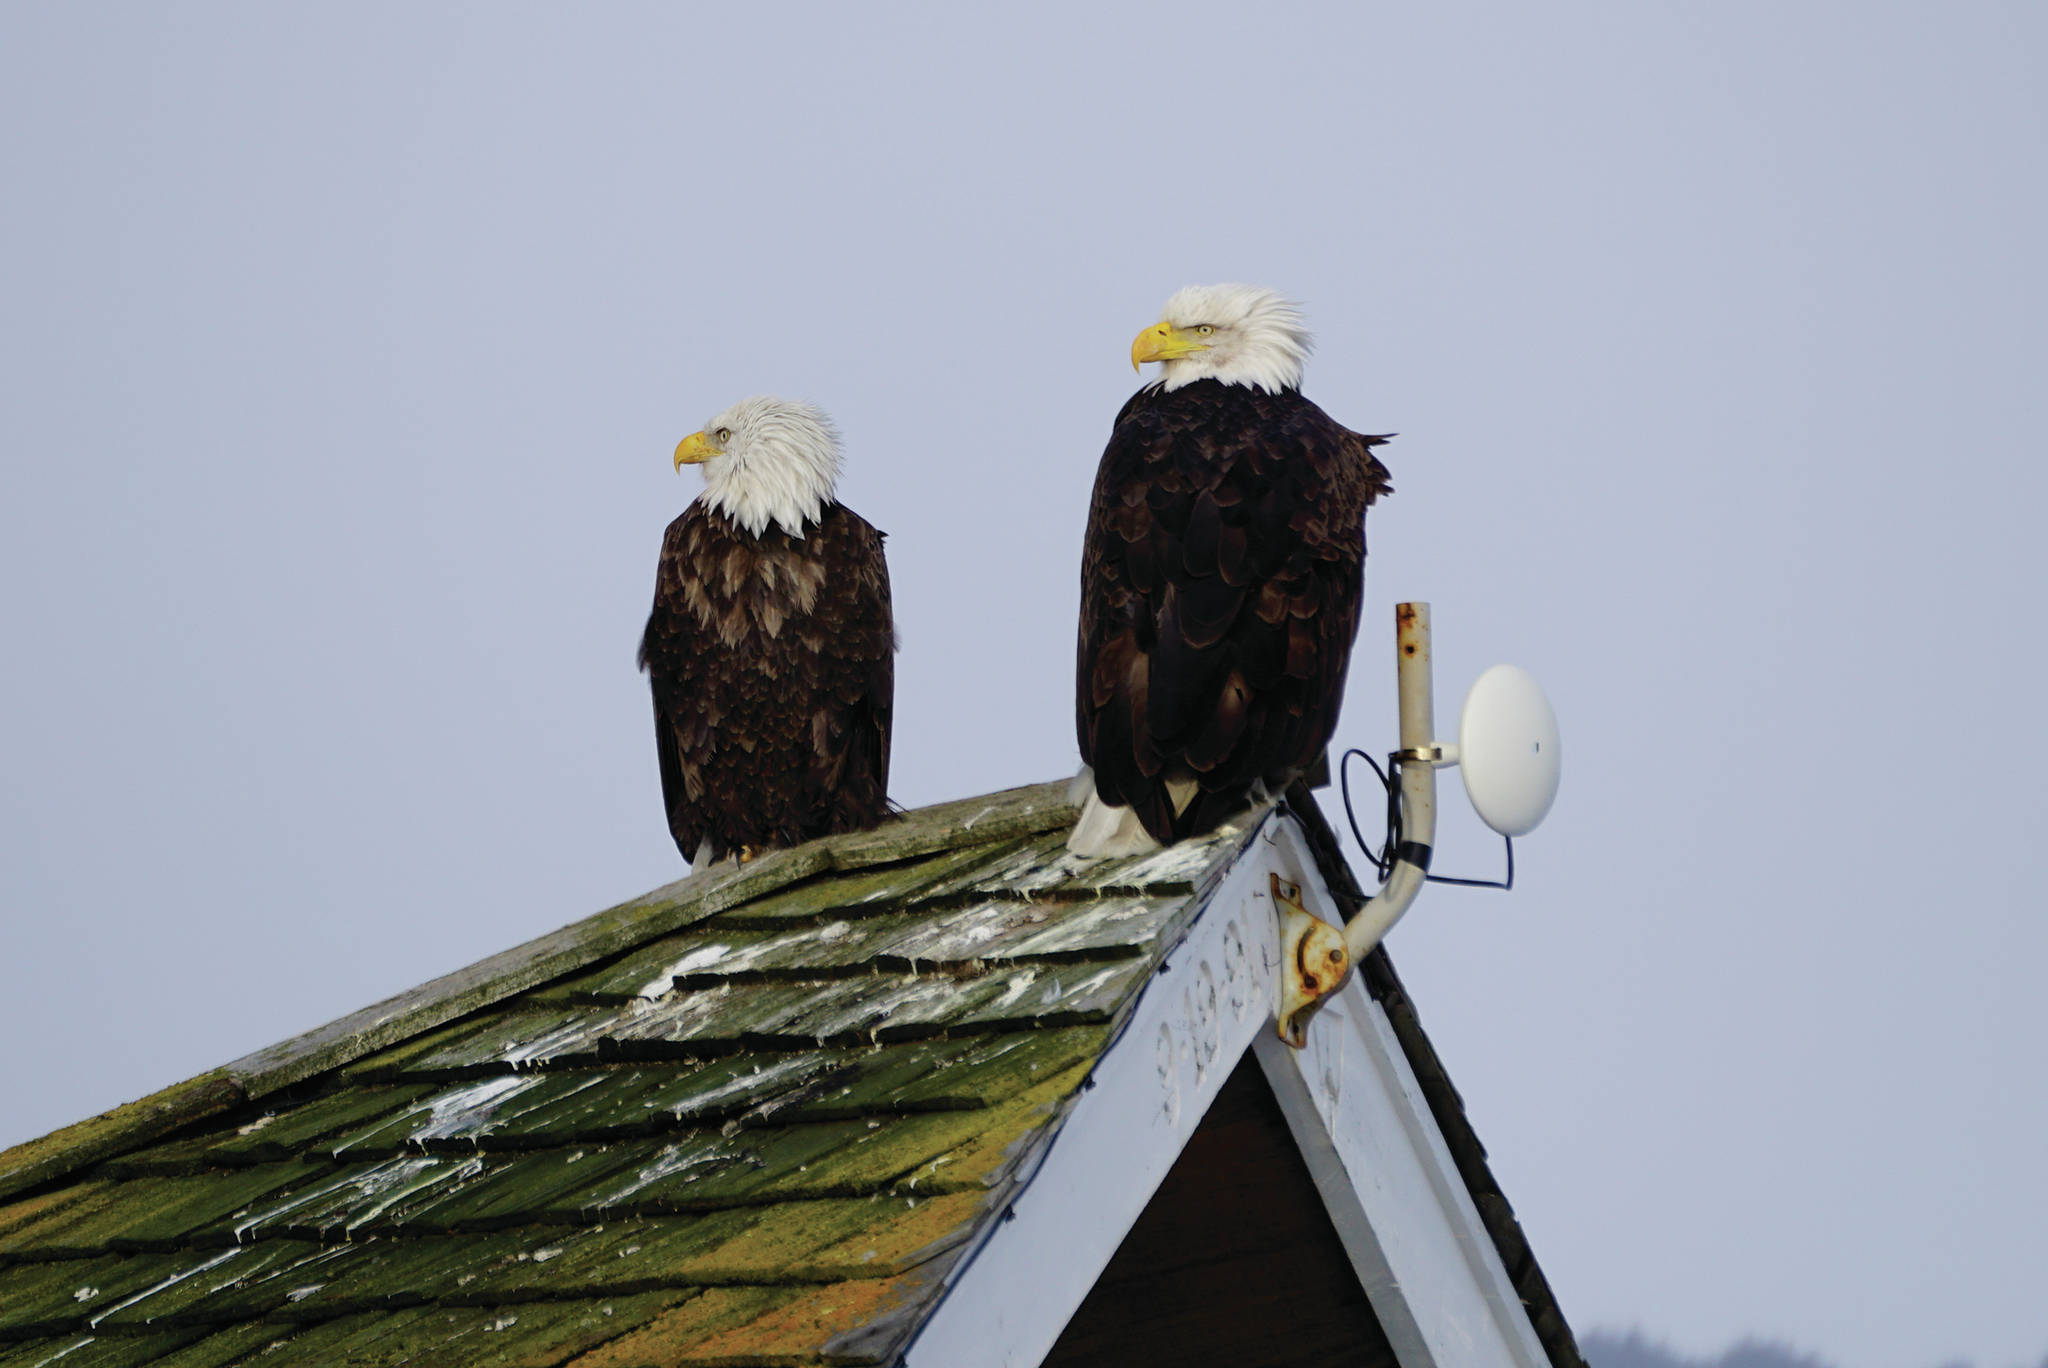 A pair of bald eagles sit on top of a house roof on Valentine’s Day, Feb. 14, 2020, on the Homer Spit in Homer, Alaska. (Photo by Michael Armstrong/Homer News)